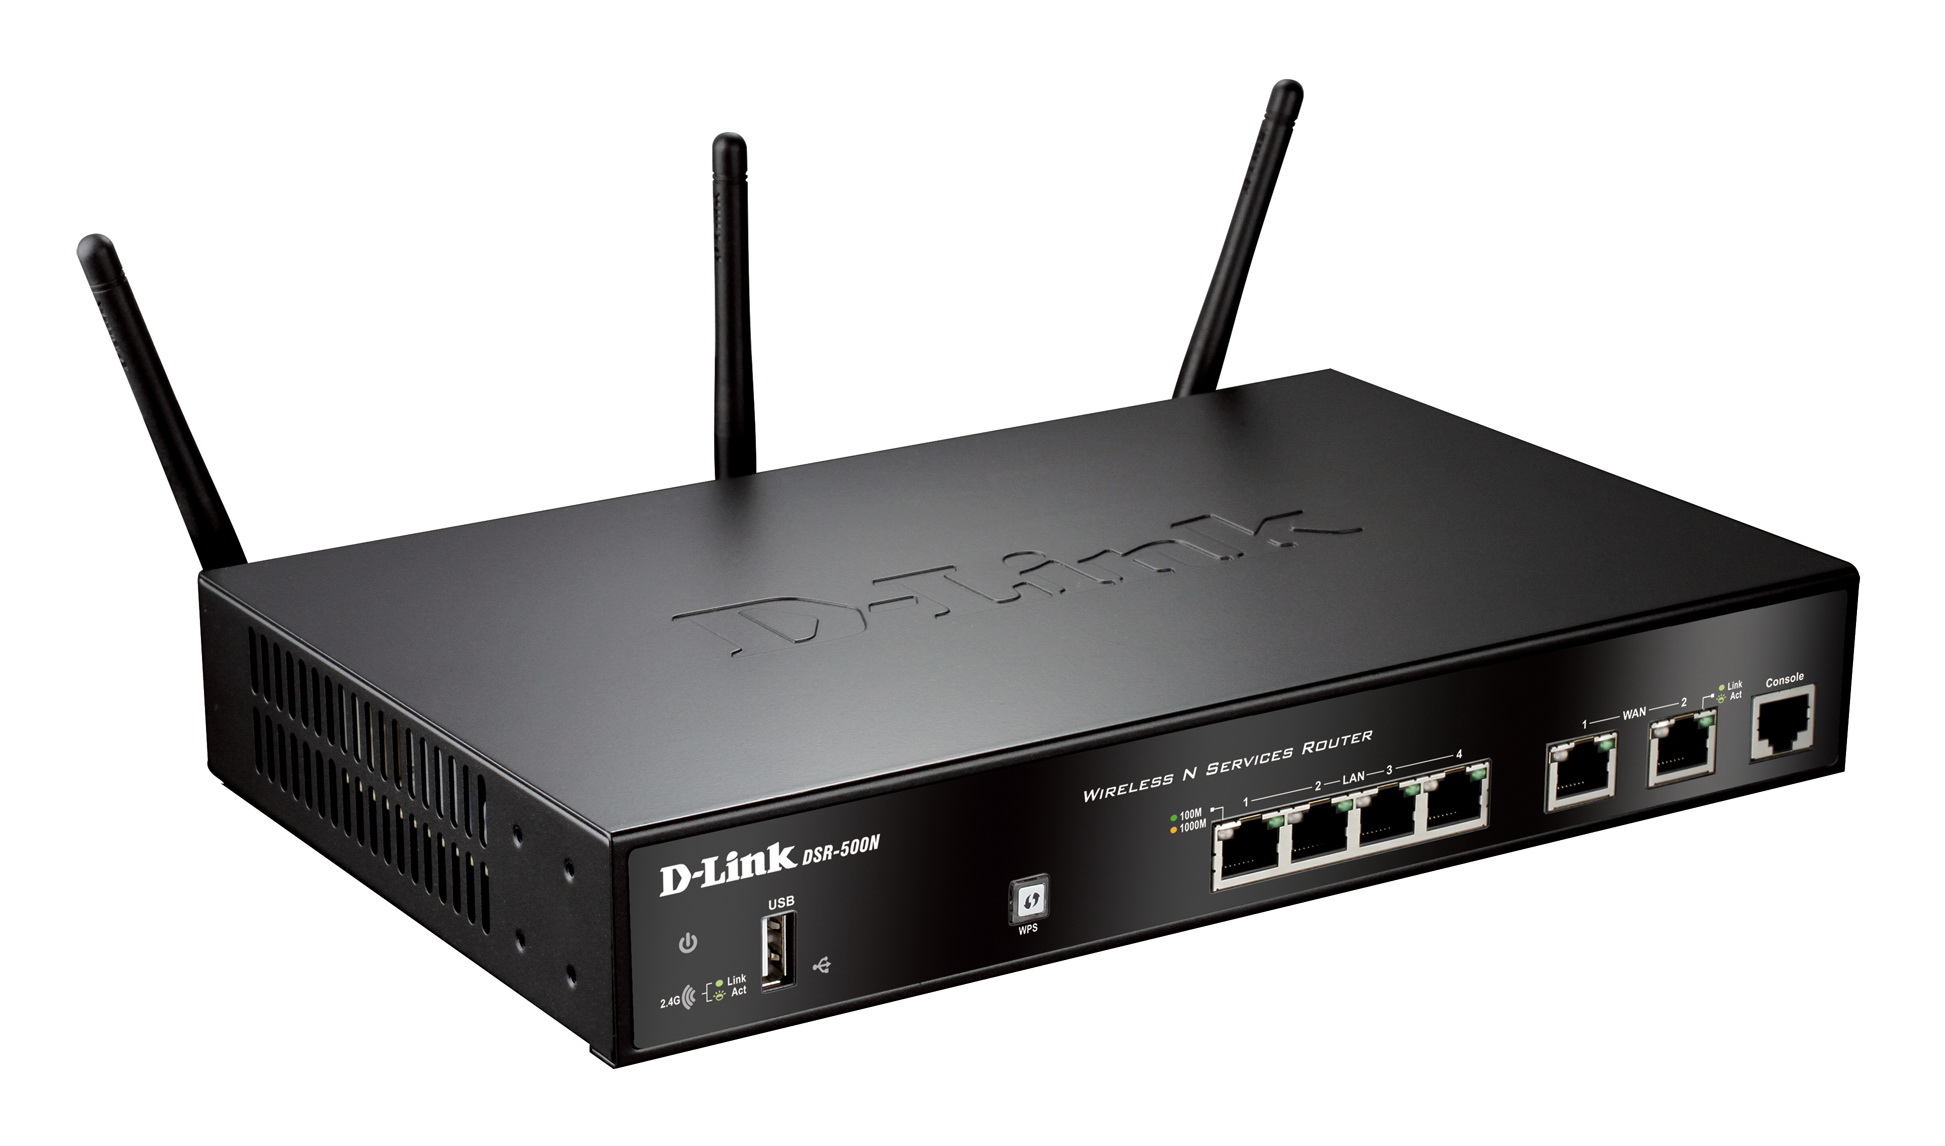 DSR-500N-A1 D-Link 802.11b/g/n Wireless Services Router (Refurbished)